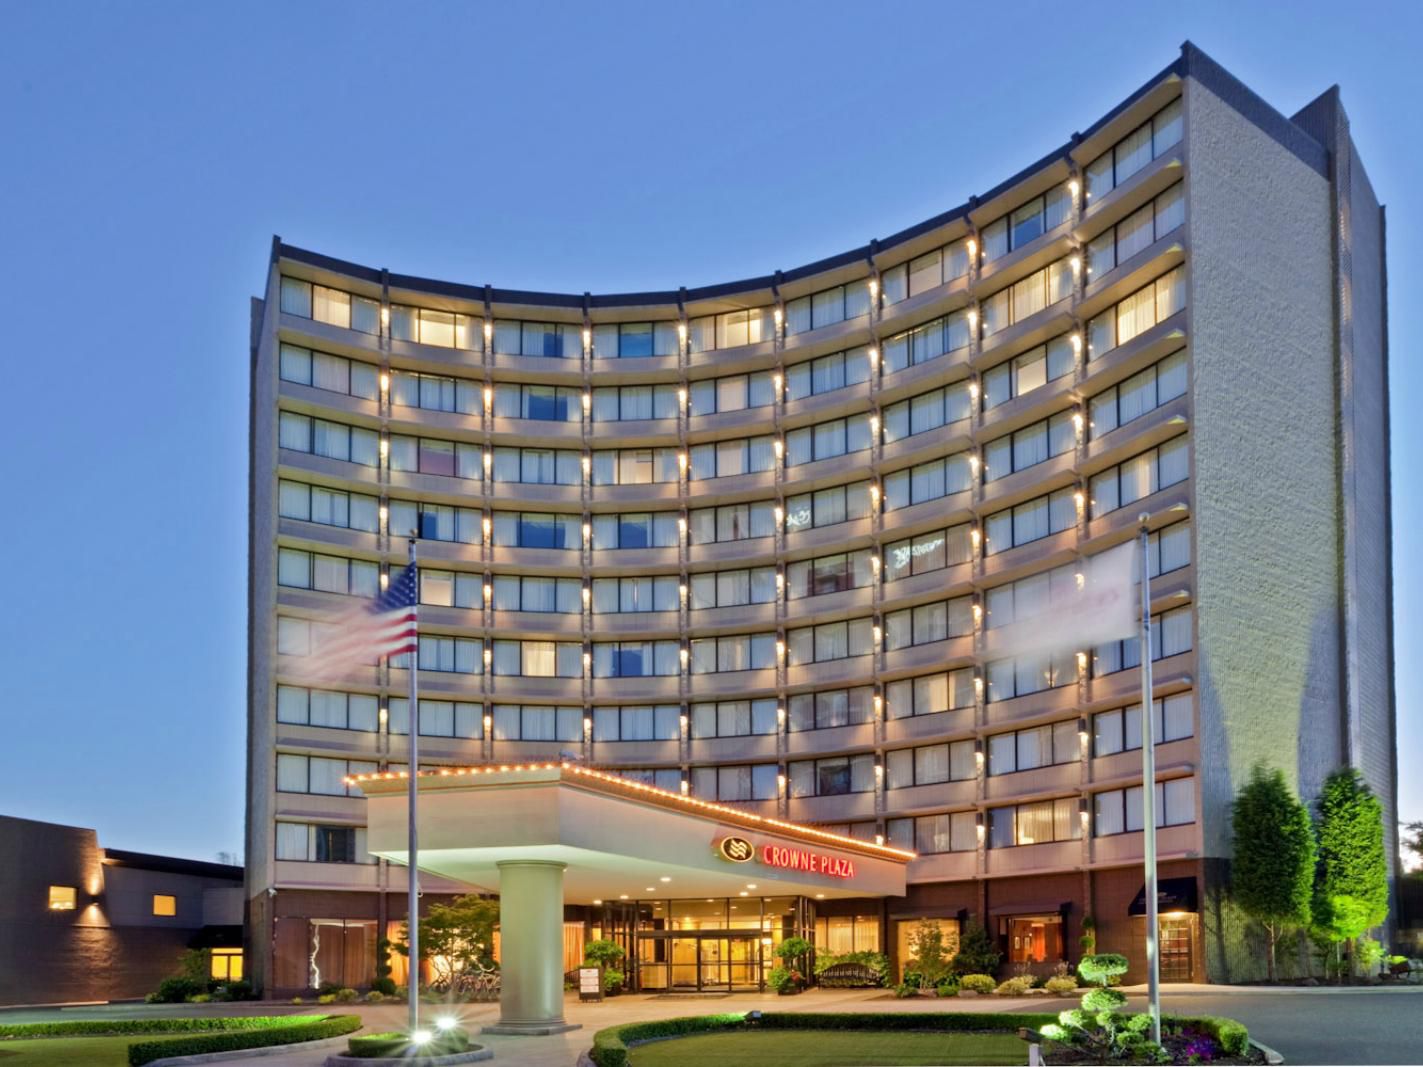 Our hotel is located near the Moda Center and the Oregon Convention Center, with easy access to downtown Portland via the MAX Light Rail. Visit the nearby Portland Art Museum, the Portland Japanese Garden and the International Rose Test Garden. We are also close to the Portland State University, and less than 20 minutes from the airport. 
